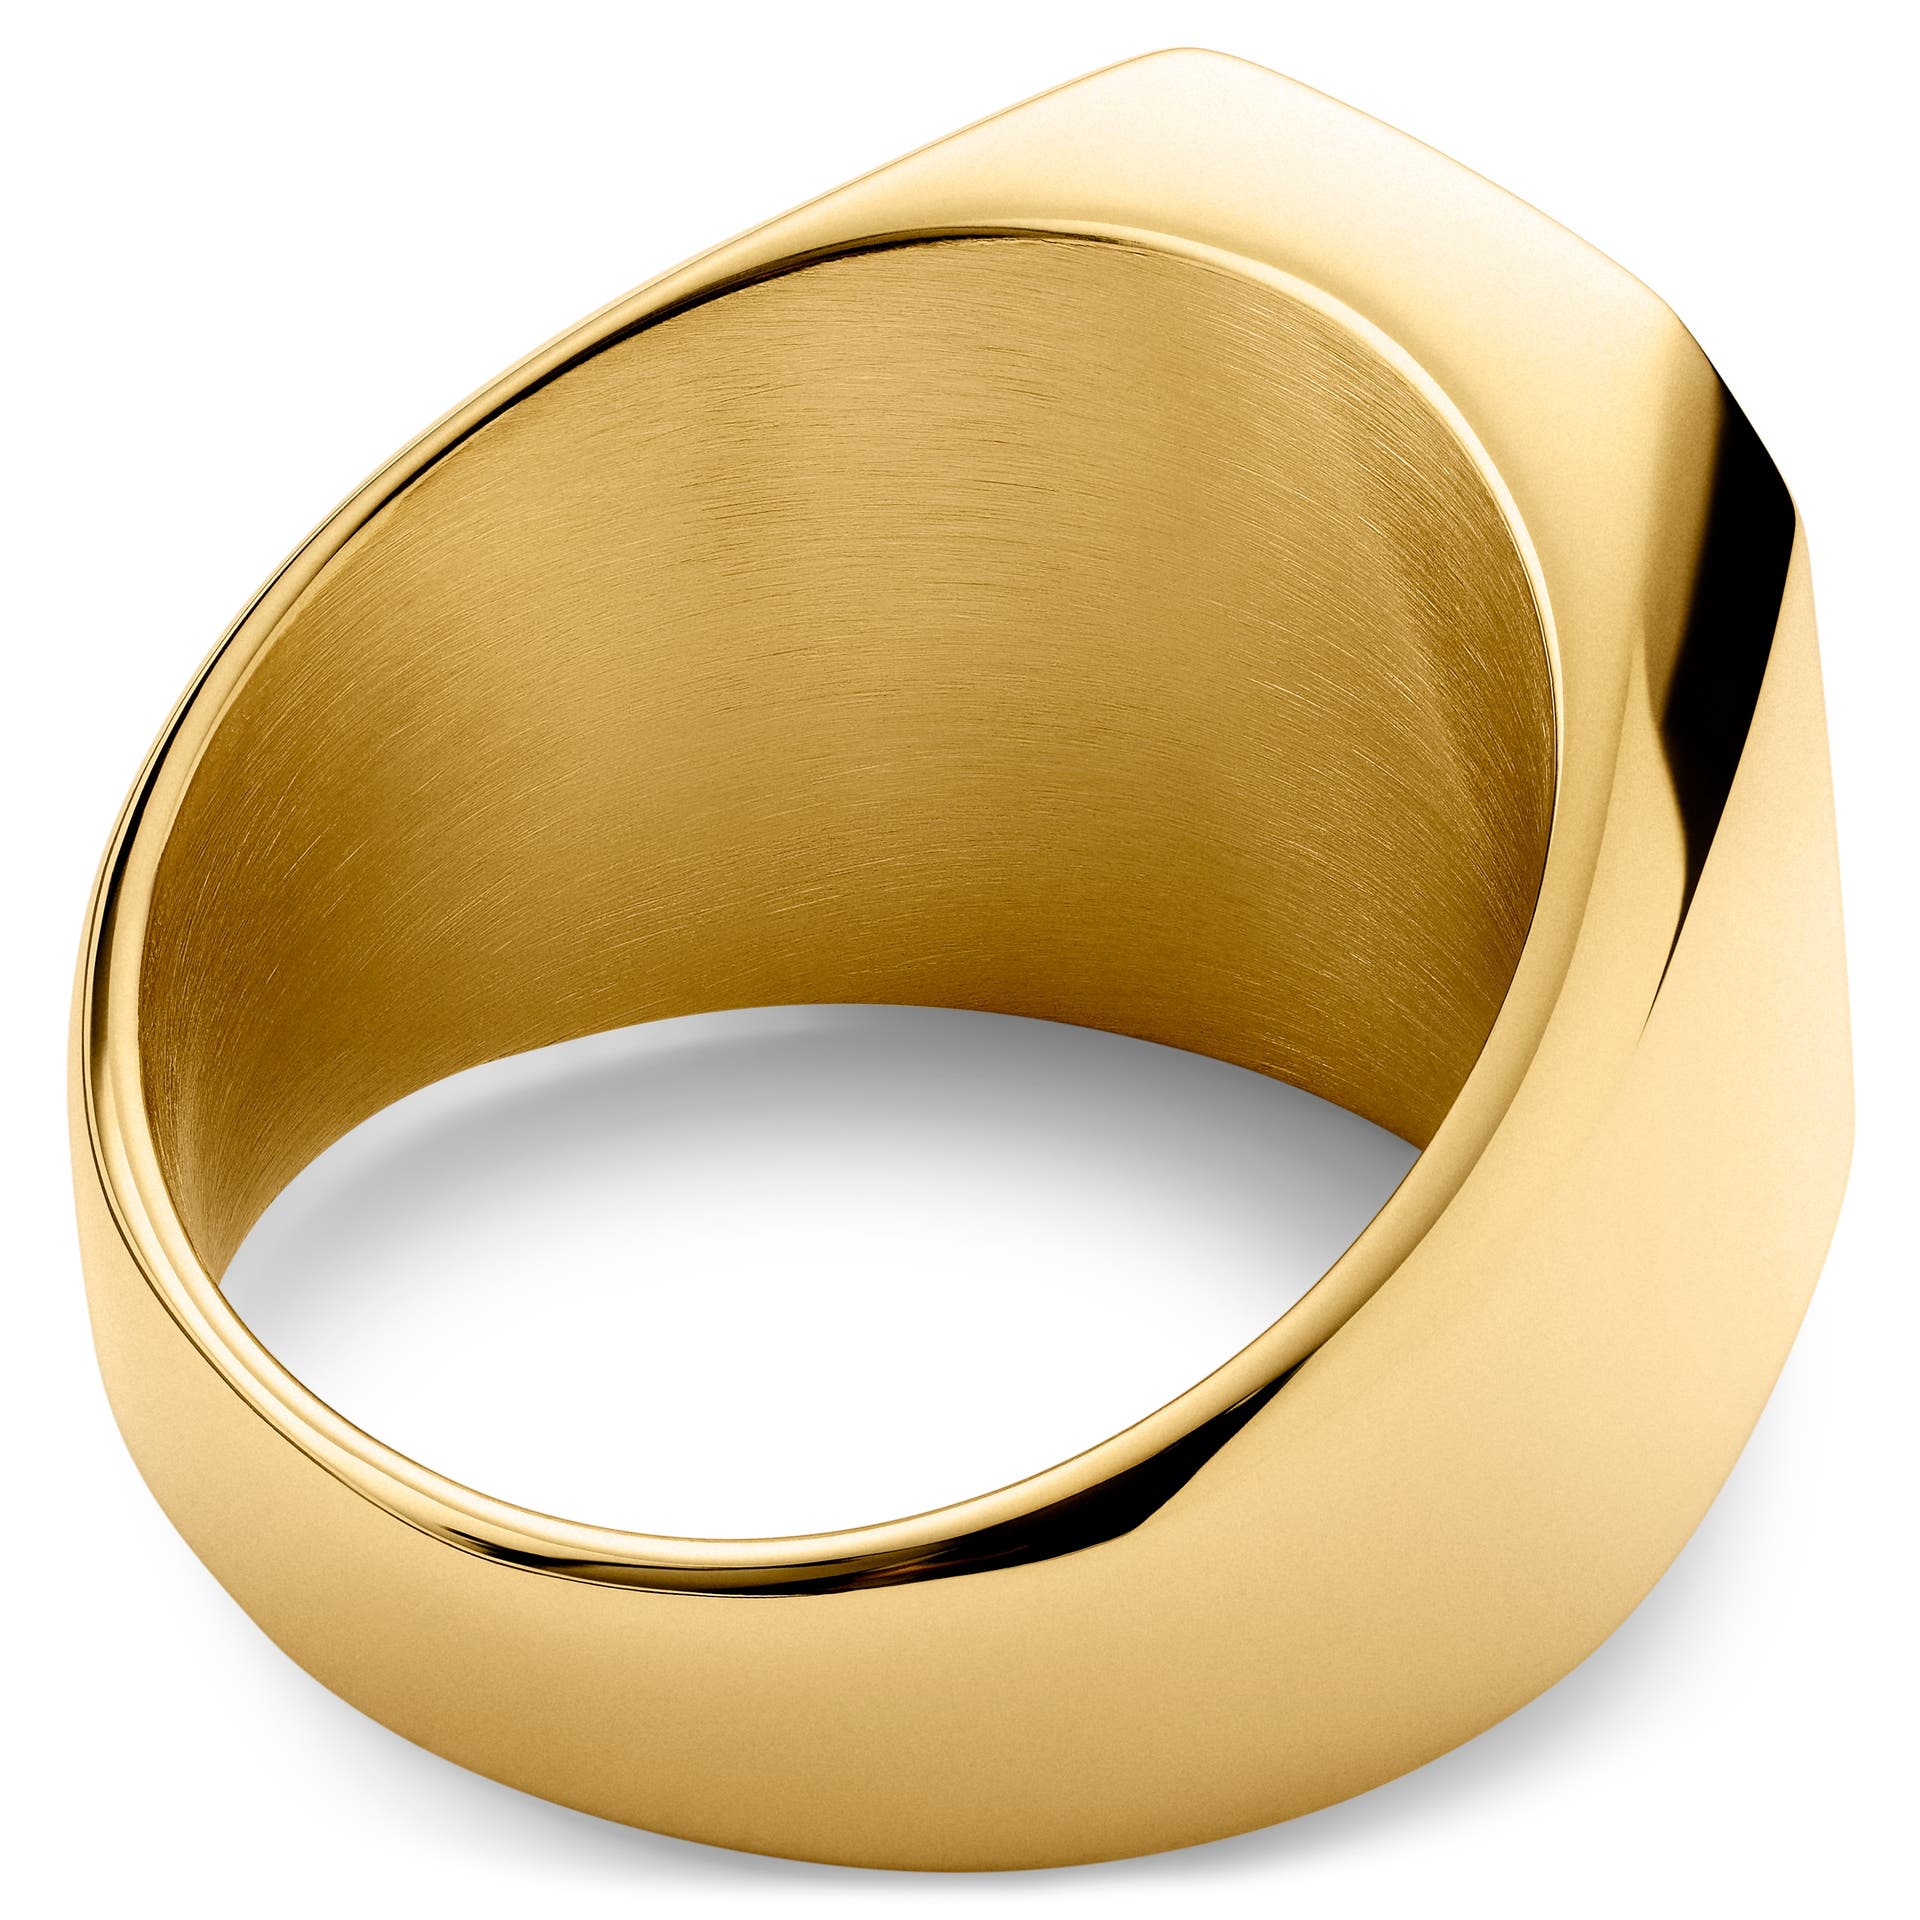 Gold-Tone Liam Ring | Lucleon | 365 day return policy